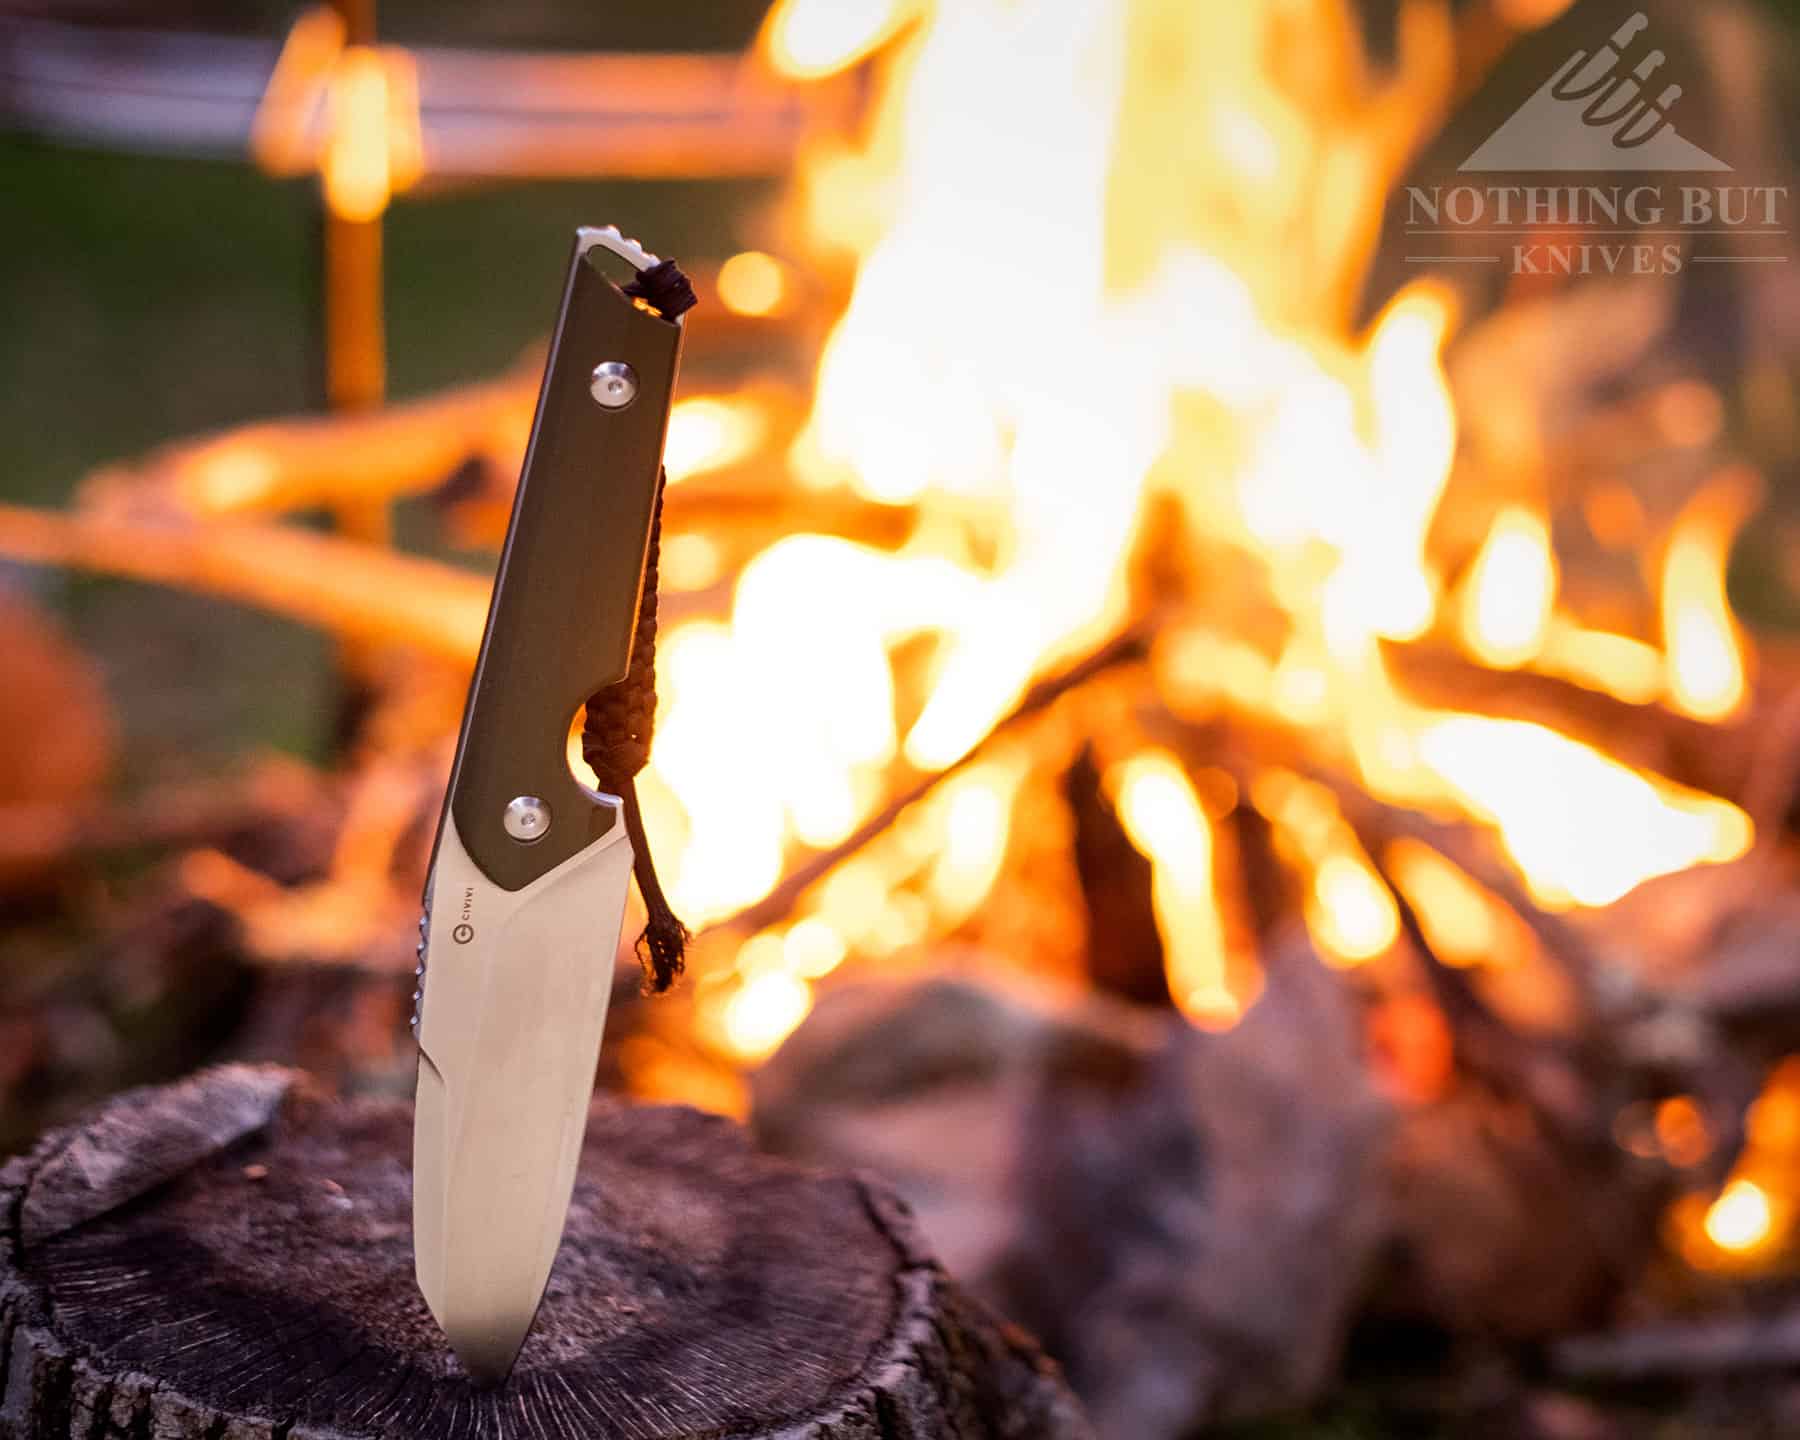 The Civivi Kepler has a clever shape that makes it a good option for camping food prep.